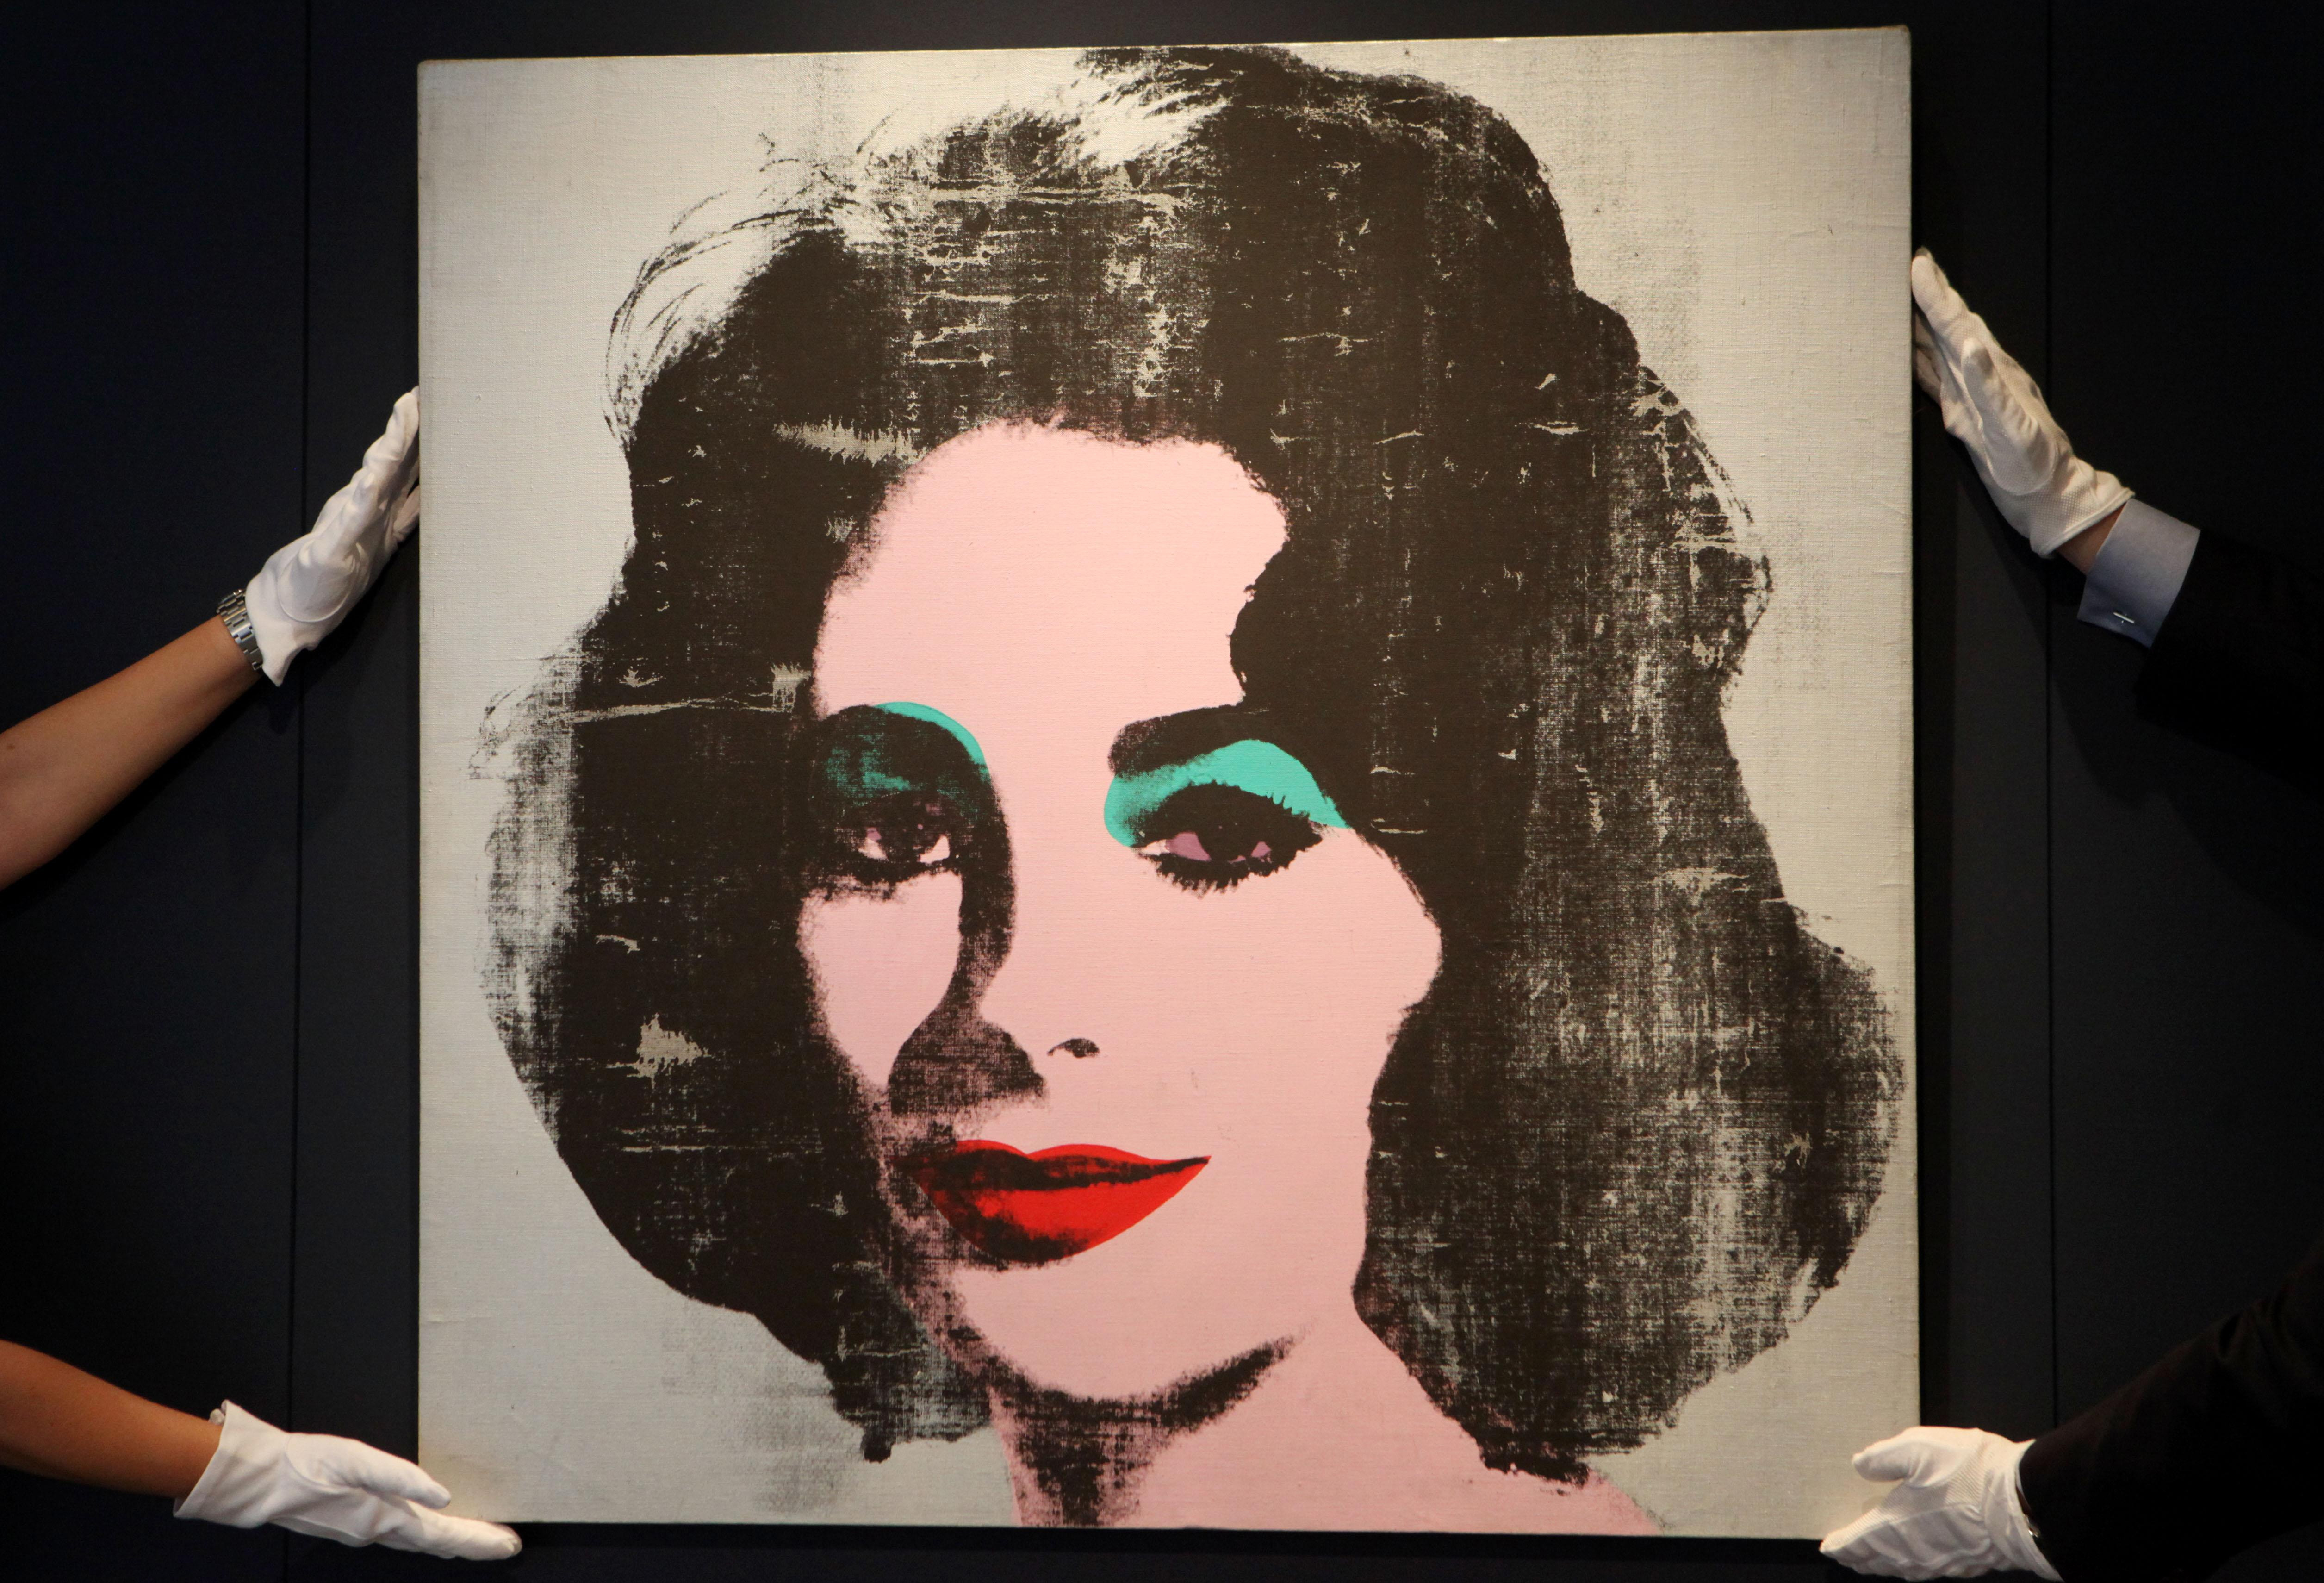 Andy Warhol portrait of Taylor